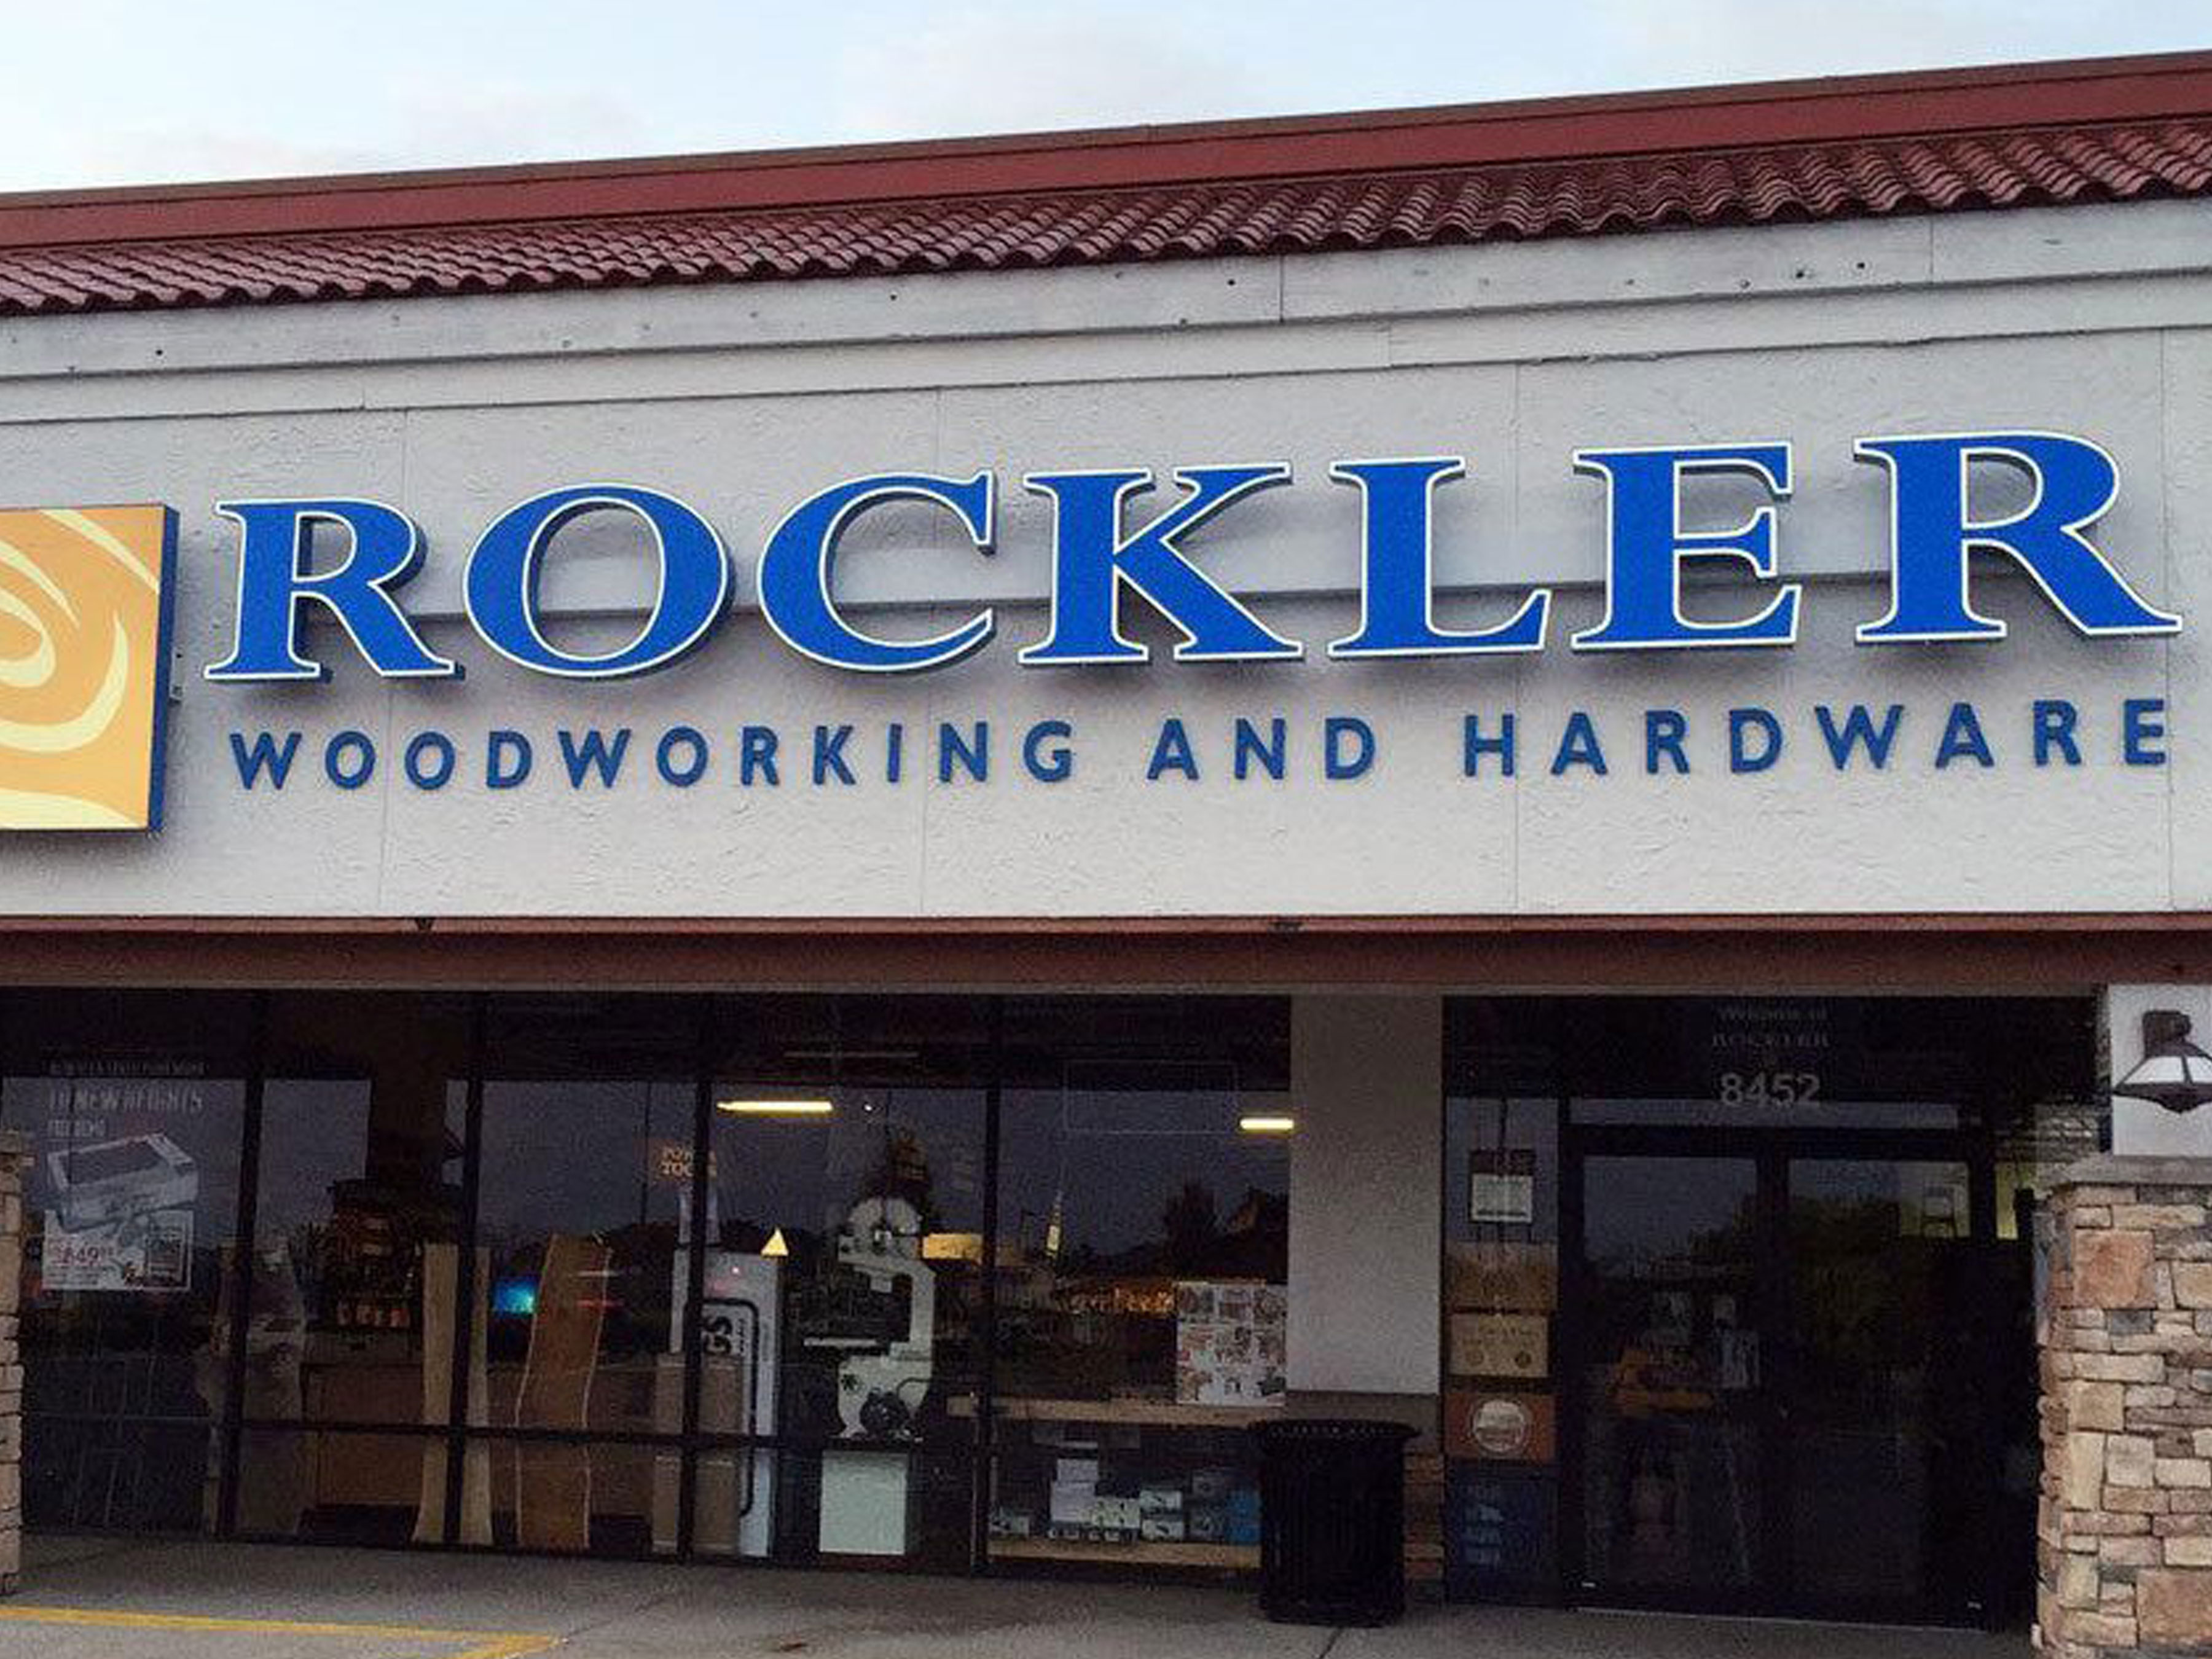 Rockler Woodworking and Hardware store